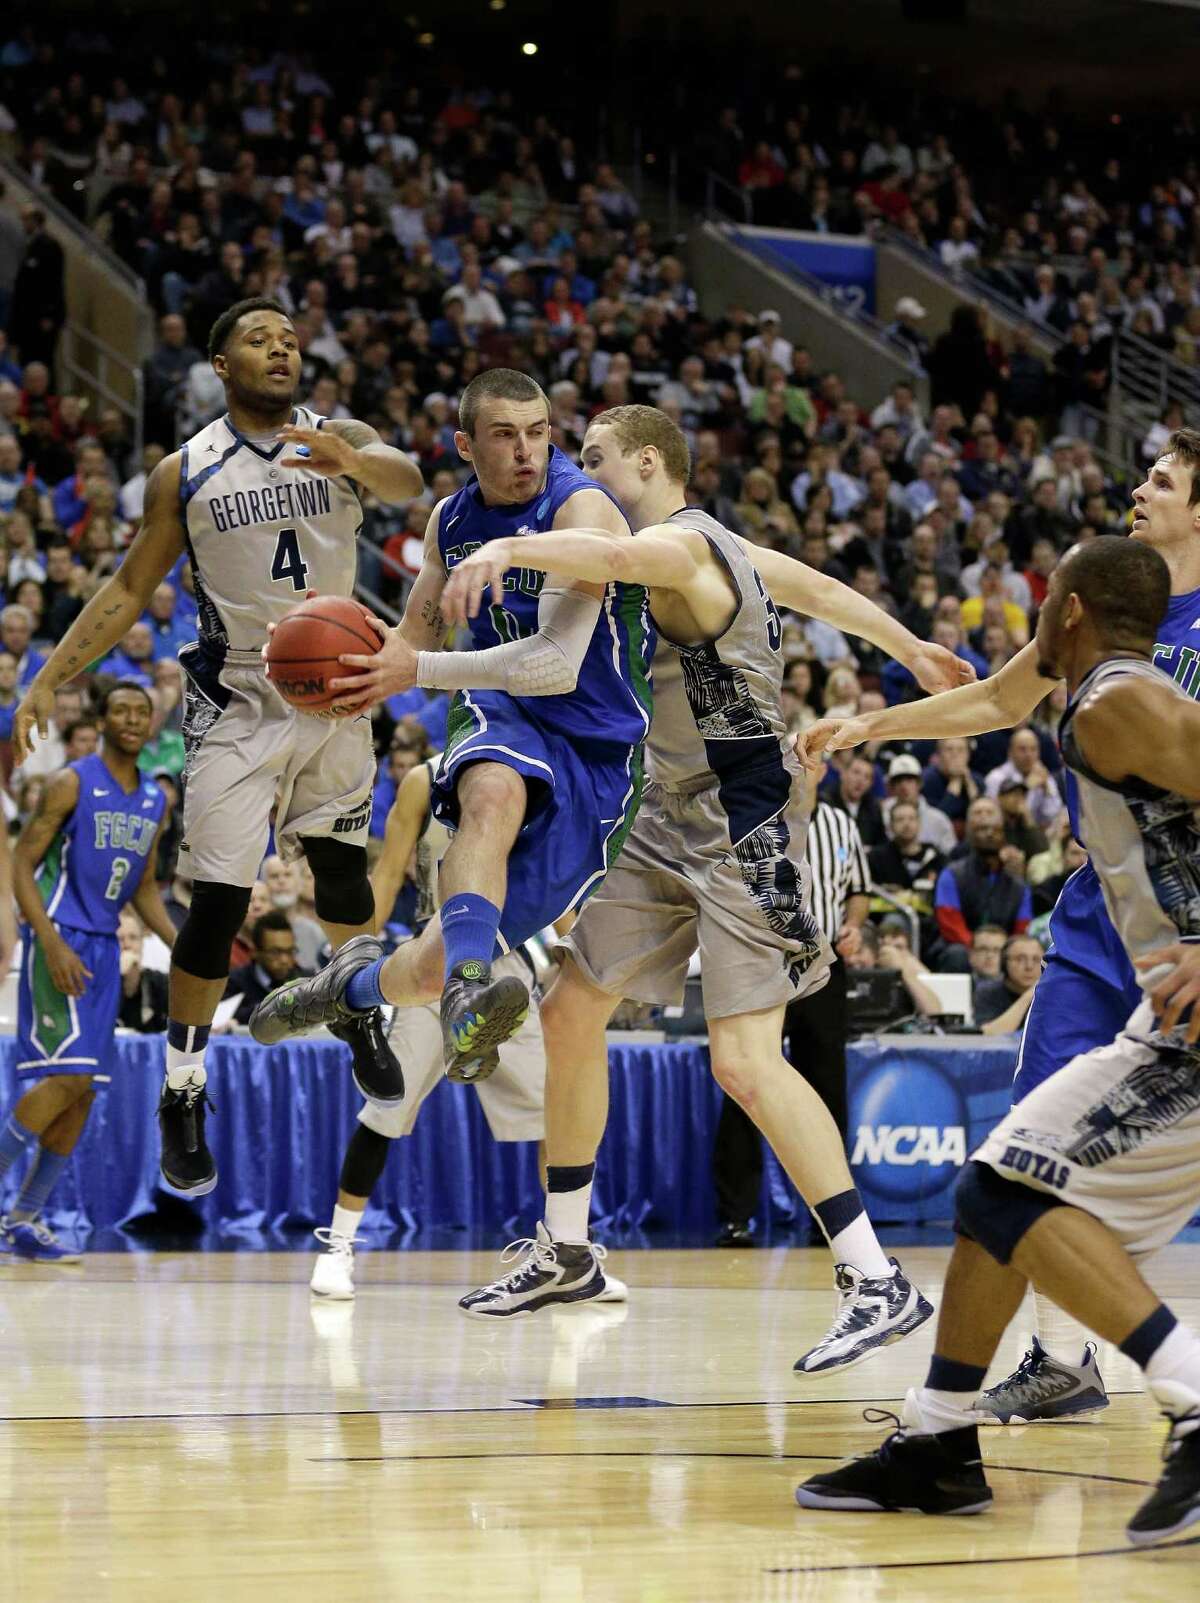 Brett Comer #0 of the Florida Gulf Coast Eagles looks to pass the ball in the second half as he drives against Nate Lubick #34 and D'Vauntes Smith-Rivera #4 of the Georgetown Hoyas during the second round.